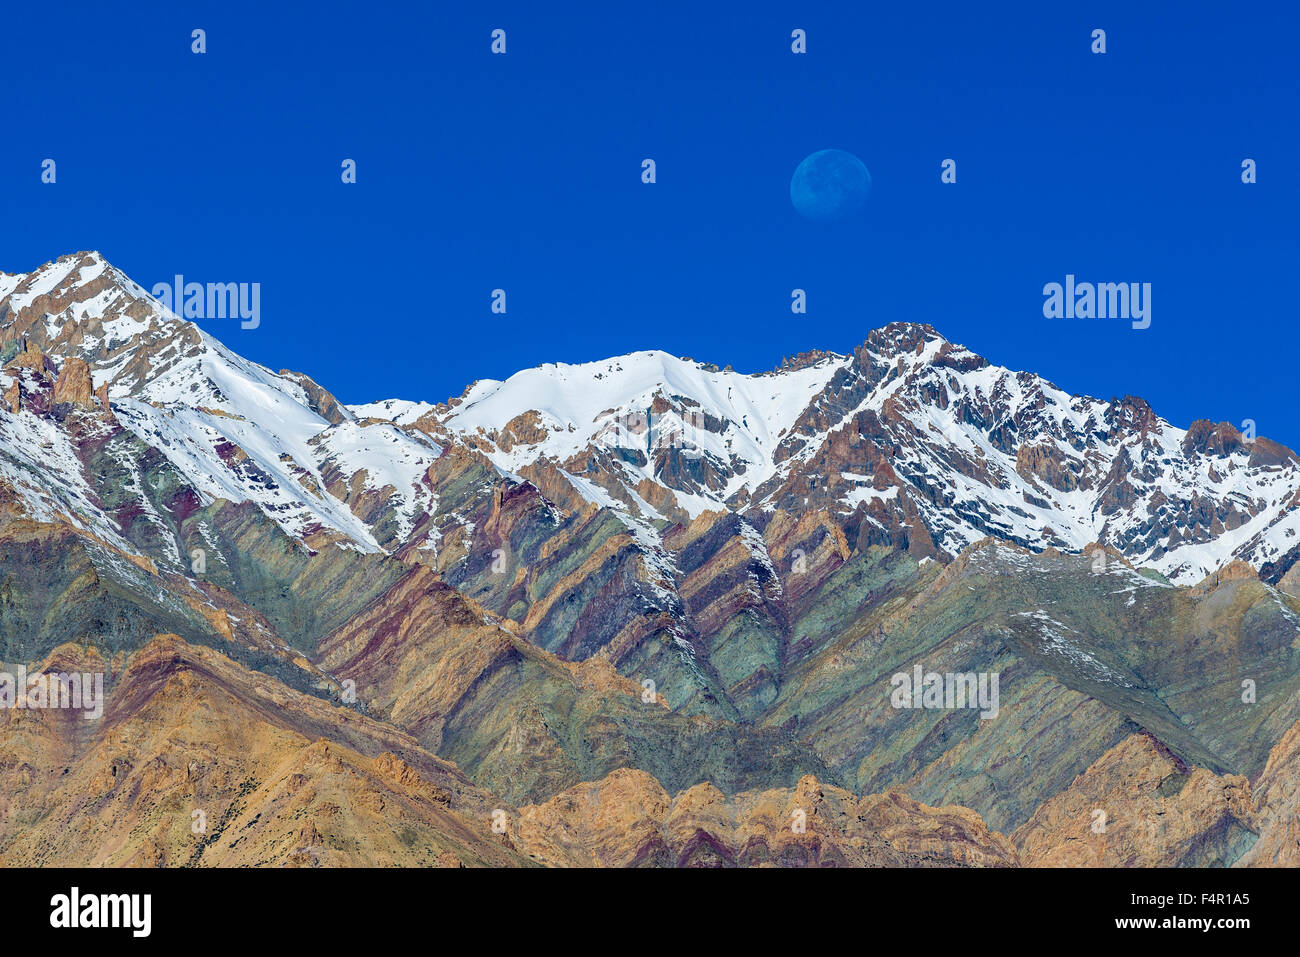 Snow covered, colorful  mountains with the rising moon above Stock Photo